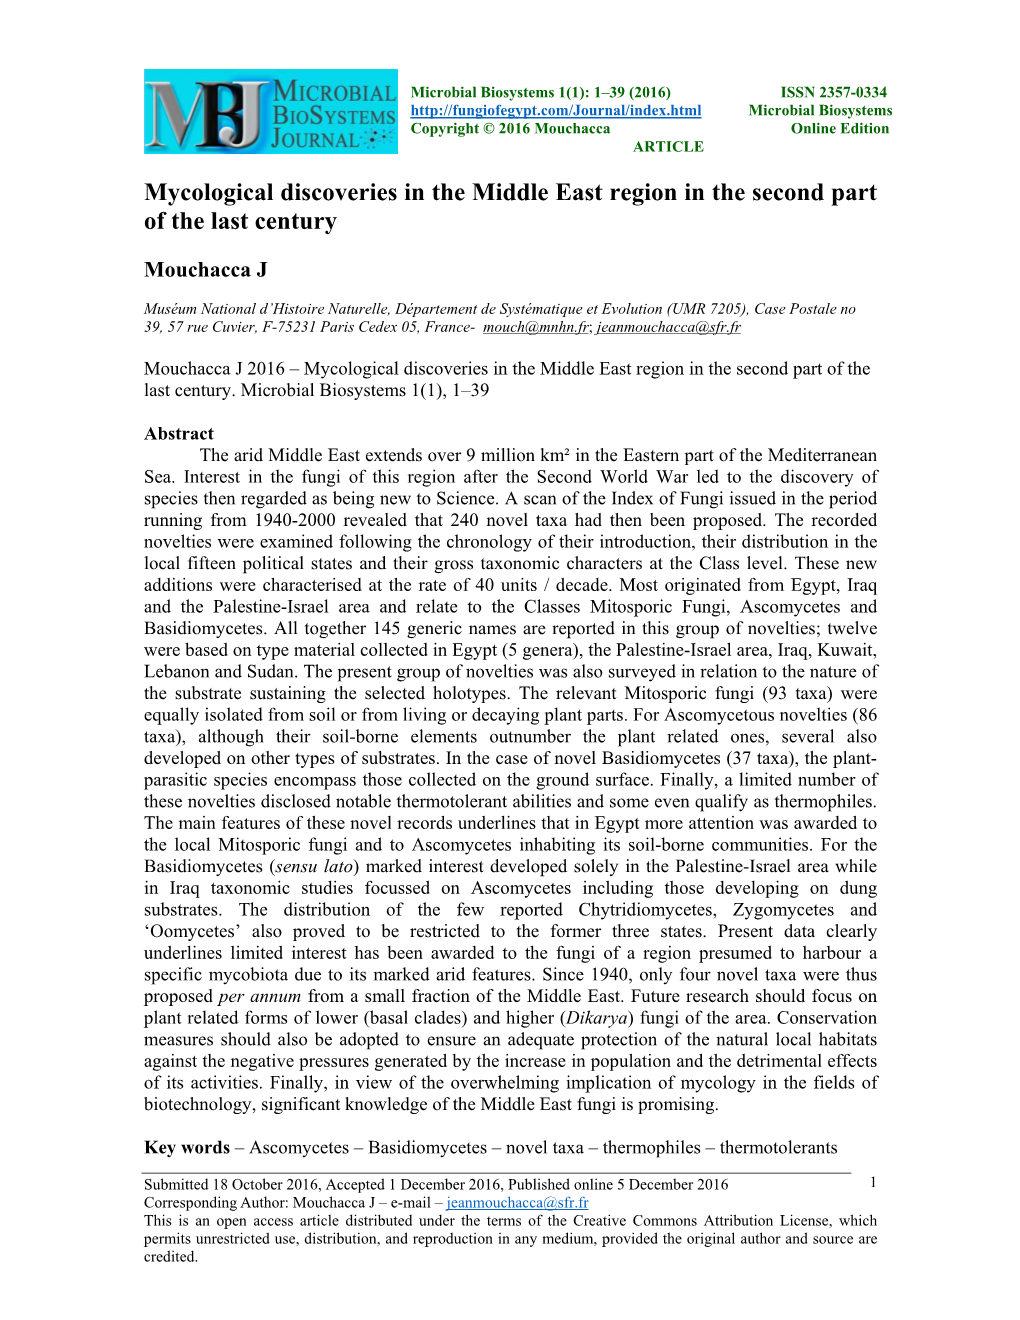 Mycological Discoveries in the Middle East Region in the Second Part of the Last Century